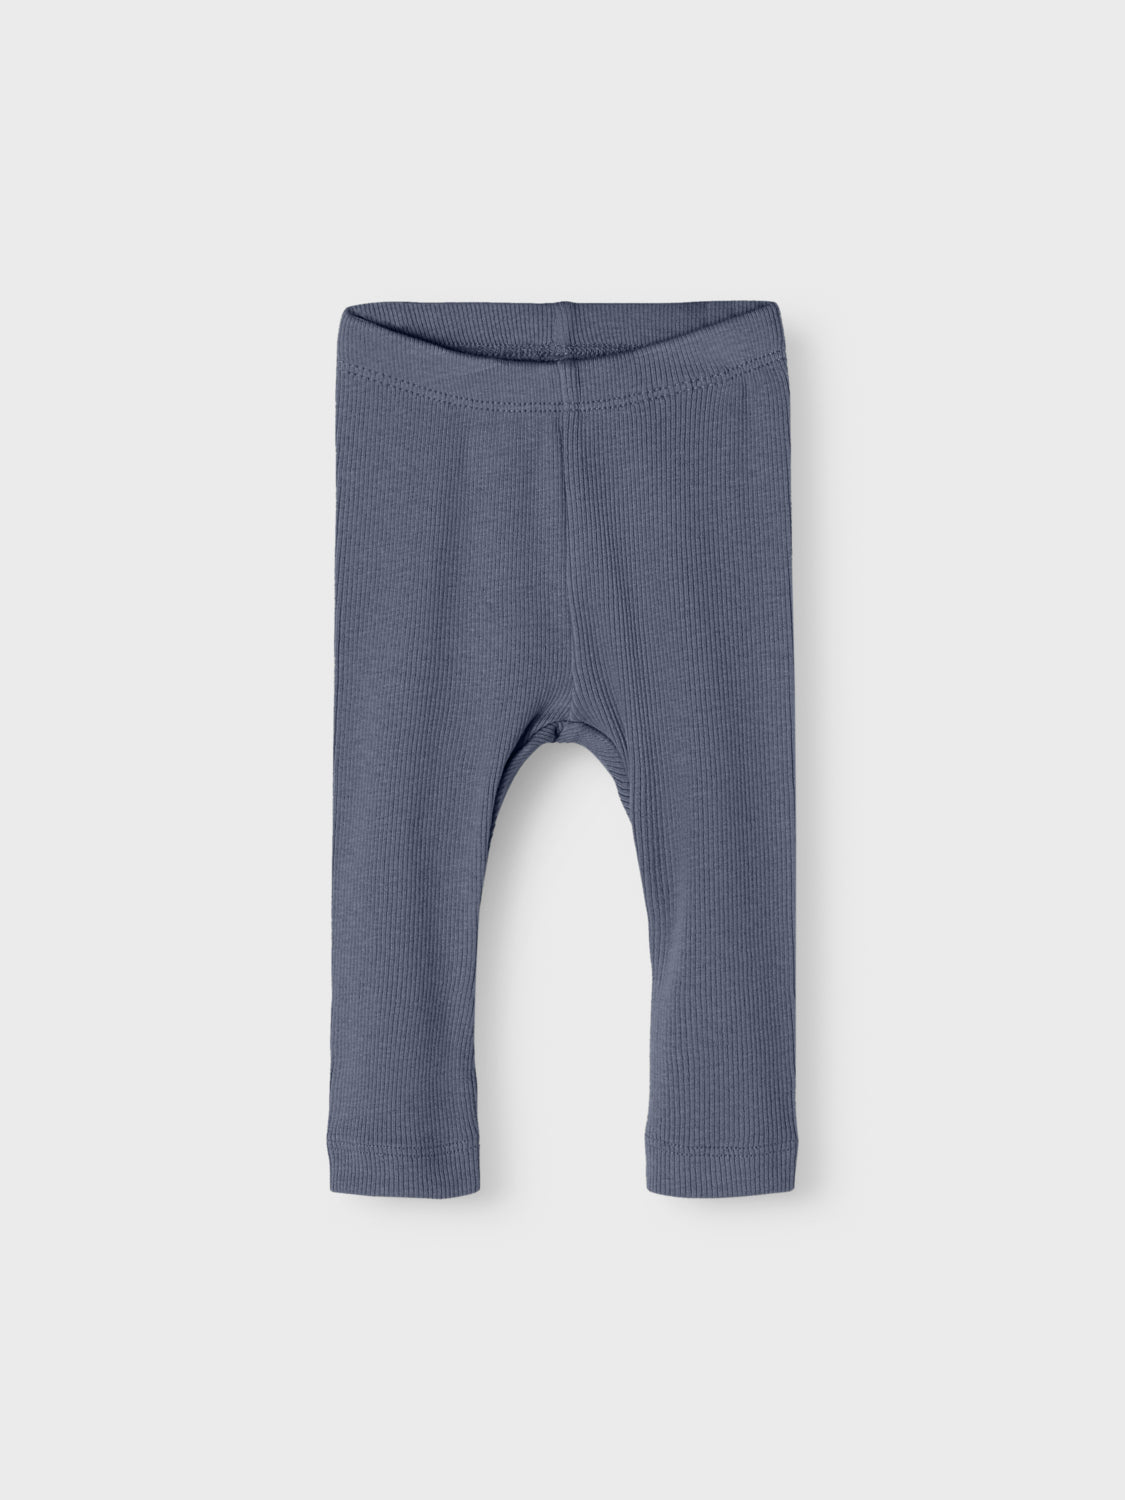 NBNKAB Pants - Grisaille